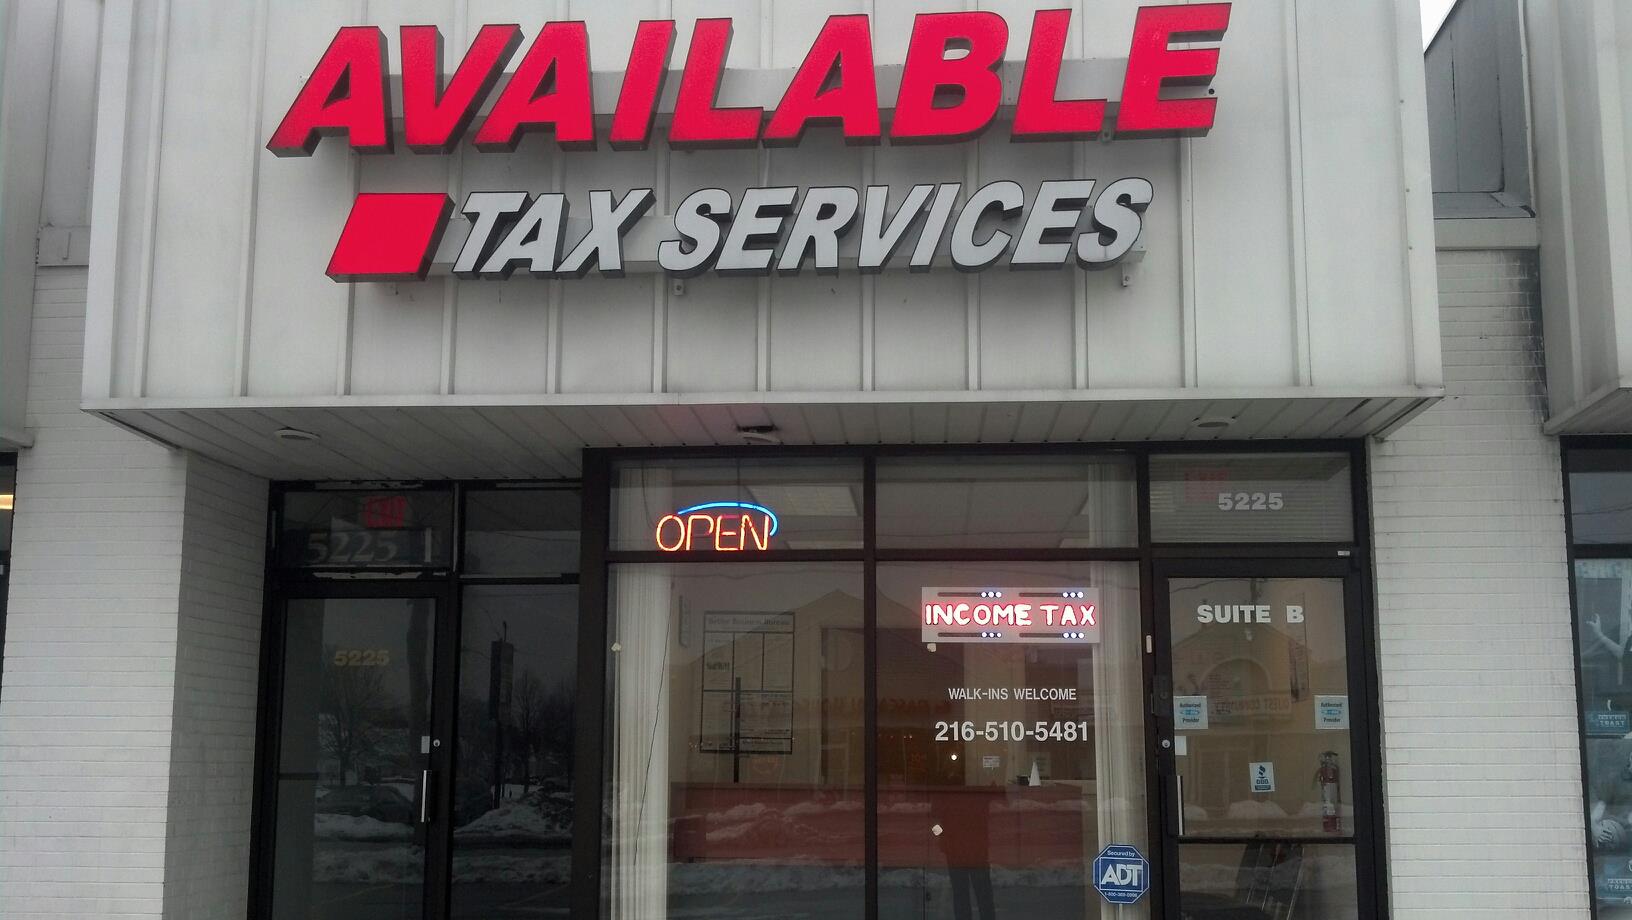 Available Tax Services Inc 5225 Northfield Rd, Bedford Heights Ohio 44146